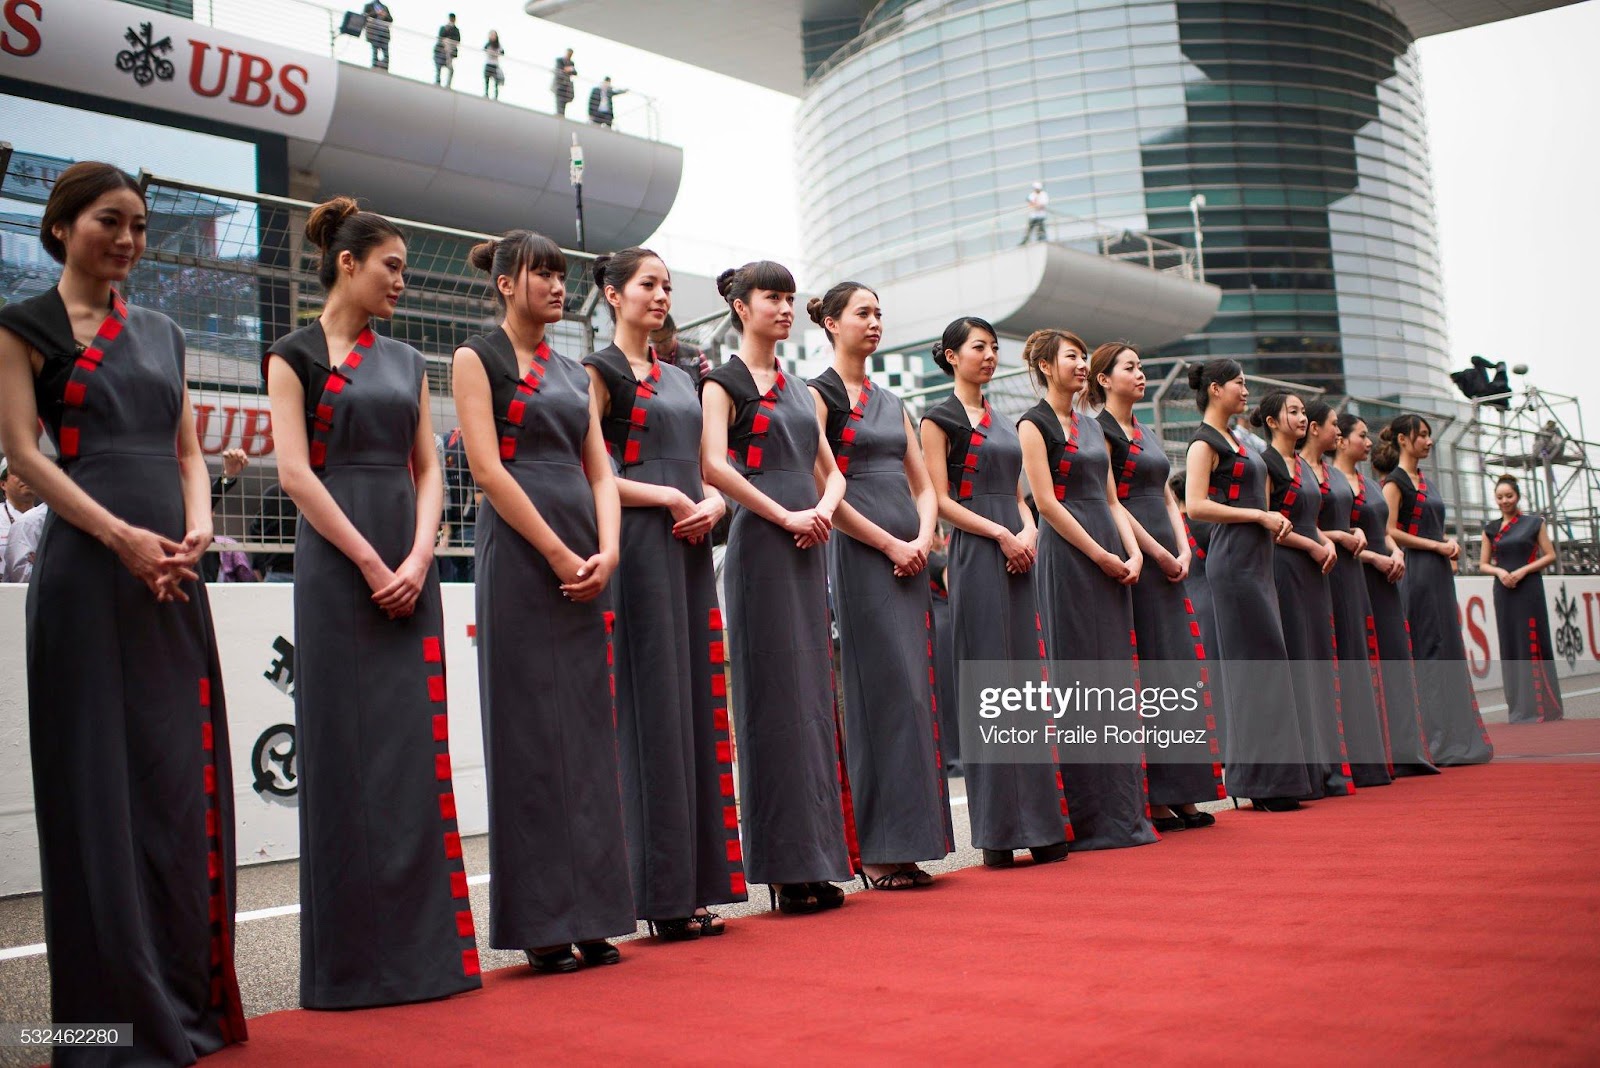 D:\Documenti\posts\posts\Women and motorsport\foto\Getty e altre\chinese-grid-girls-pose-at-the-pit-lane-during-the-ubs-chinese-f1-picture-id532462280.jpg